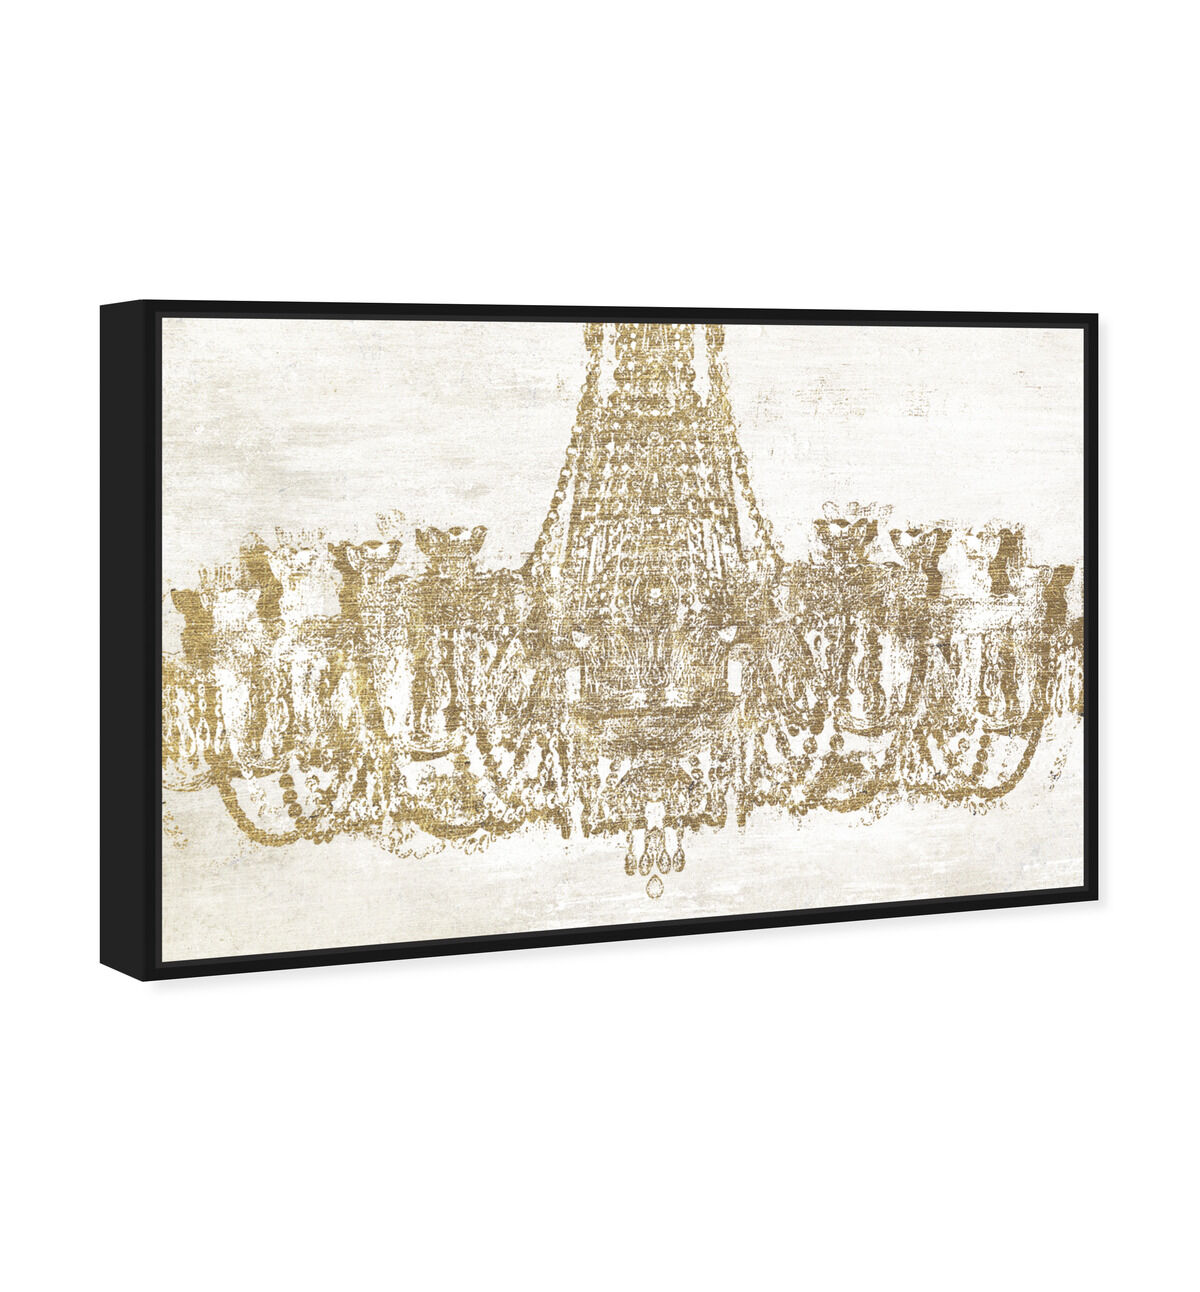 Glam Chandelier | Fashion and Glam Wall Art by Oliver Gal